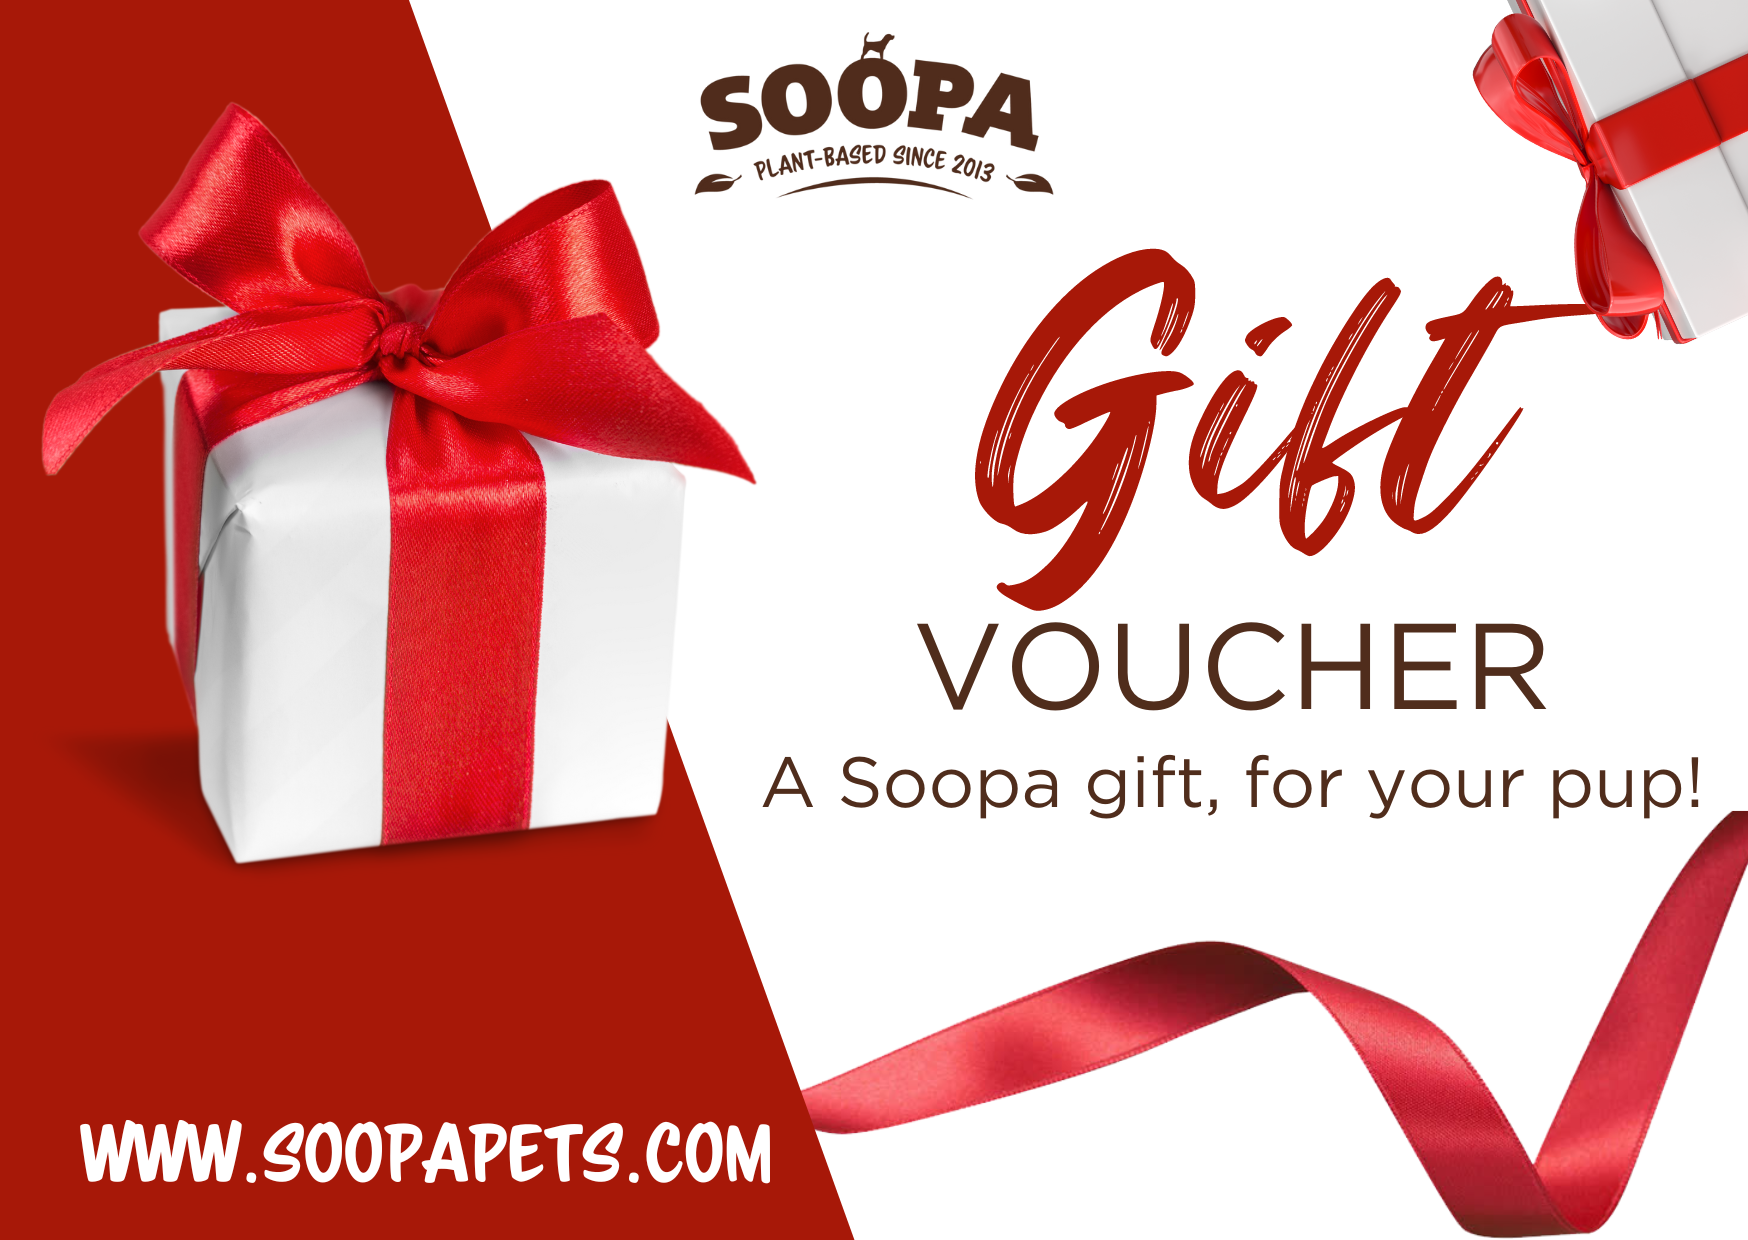 Image of Soopa Gift Card, £10.00 GBP